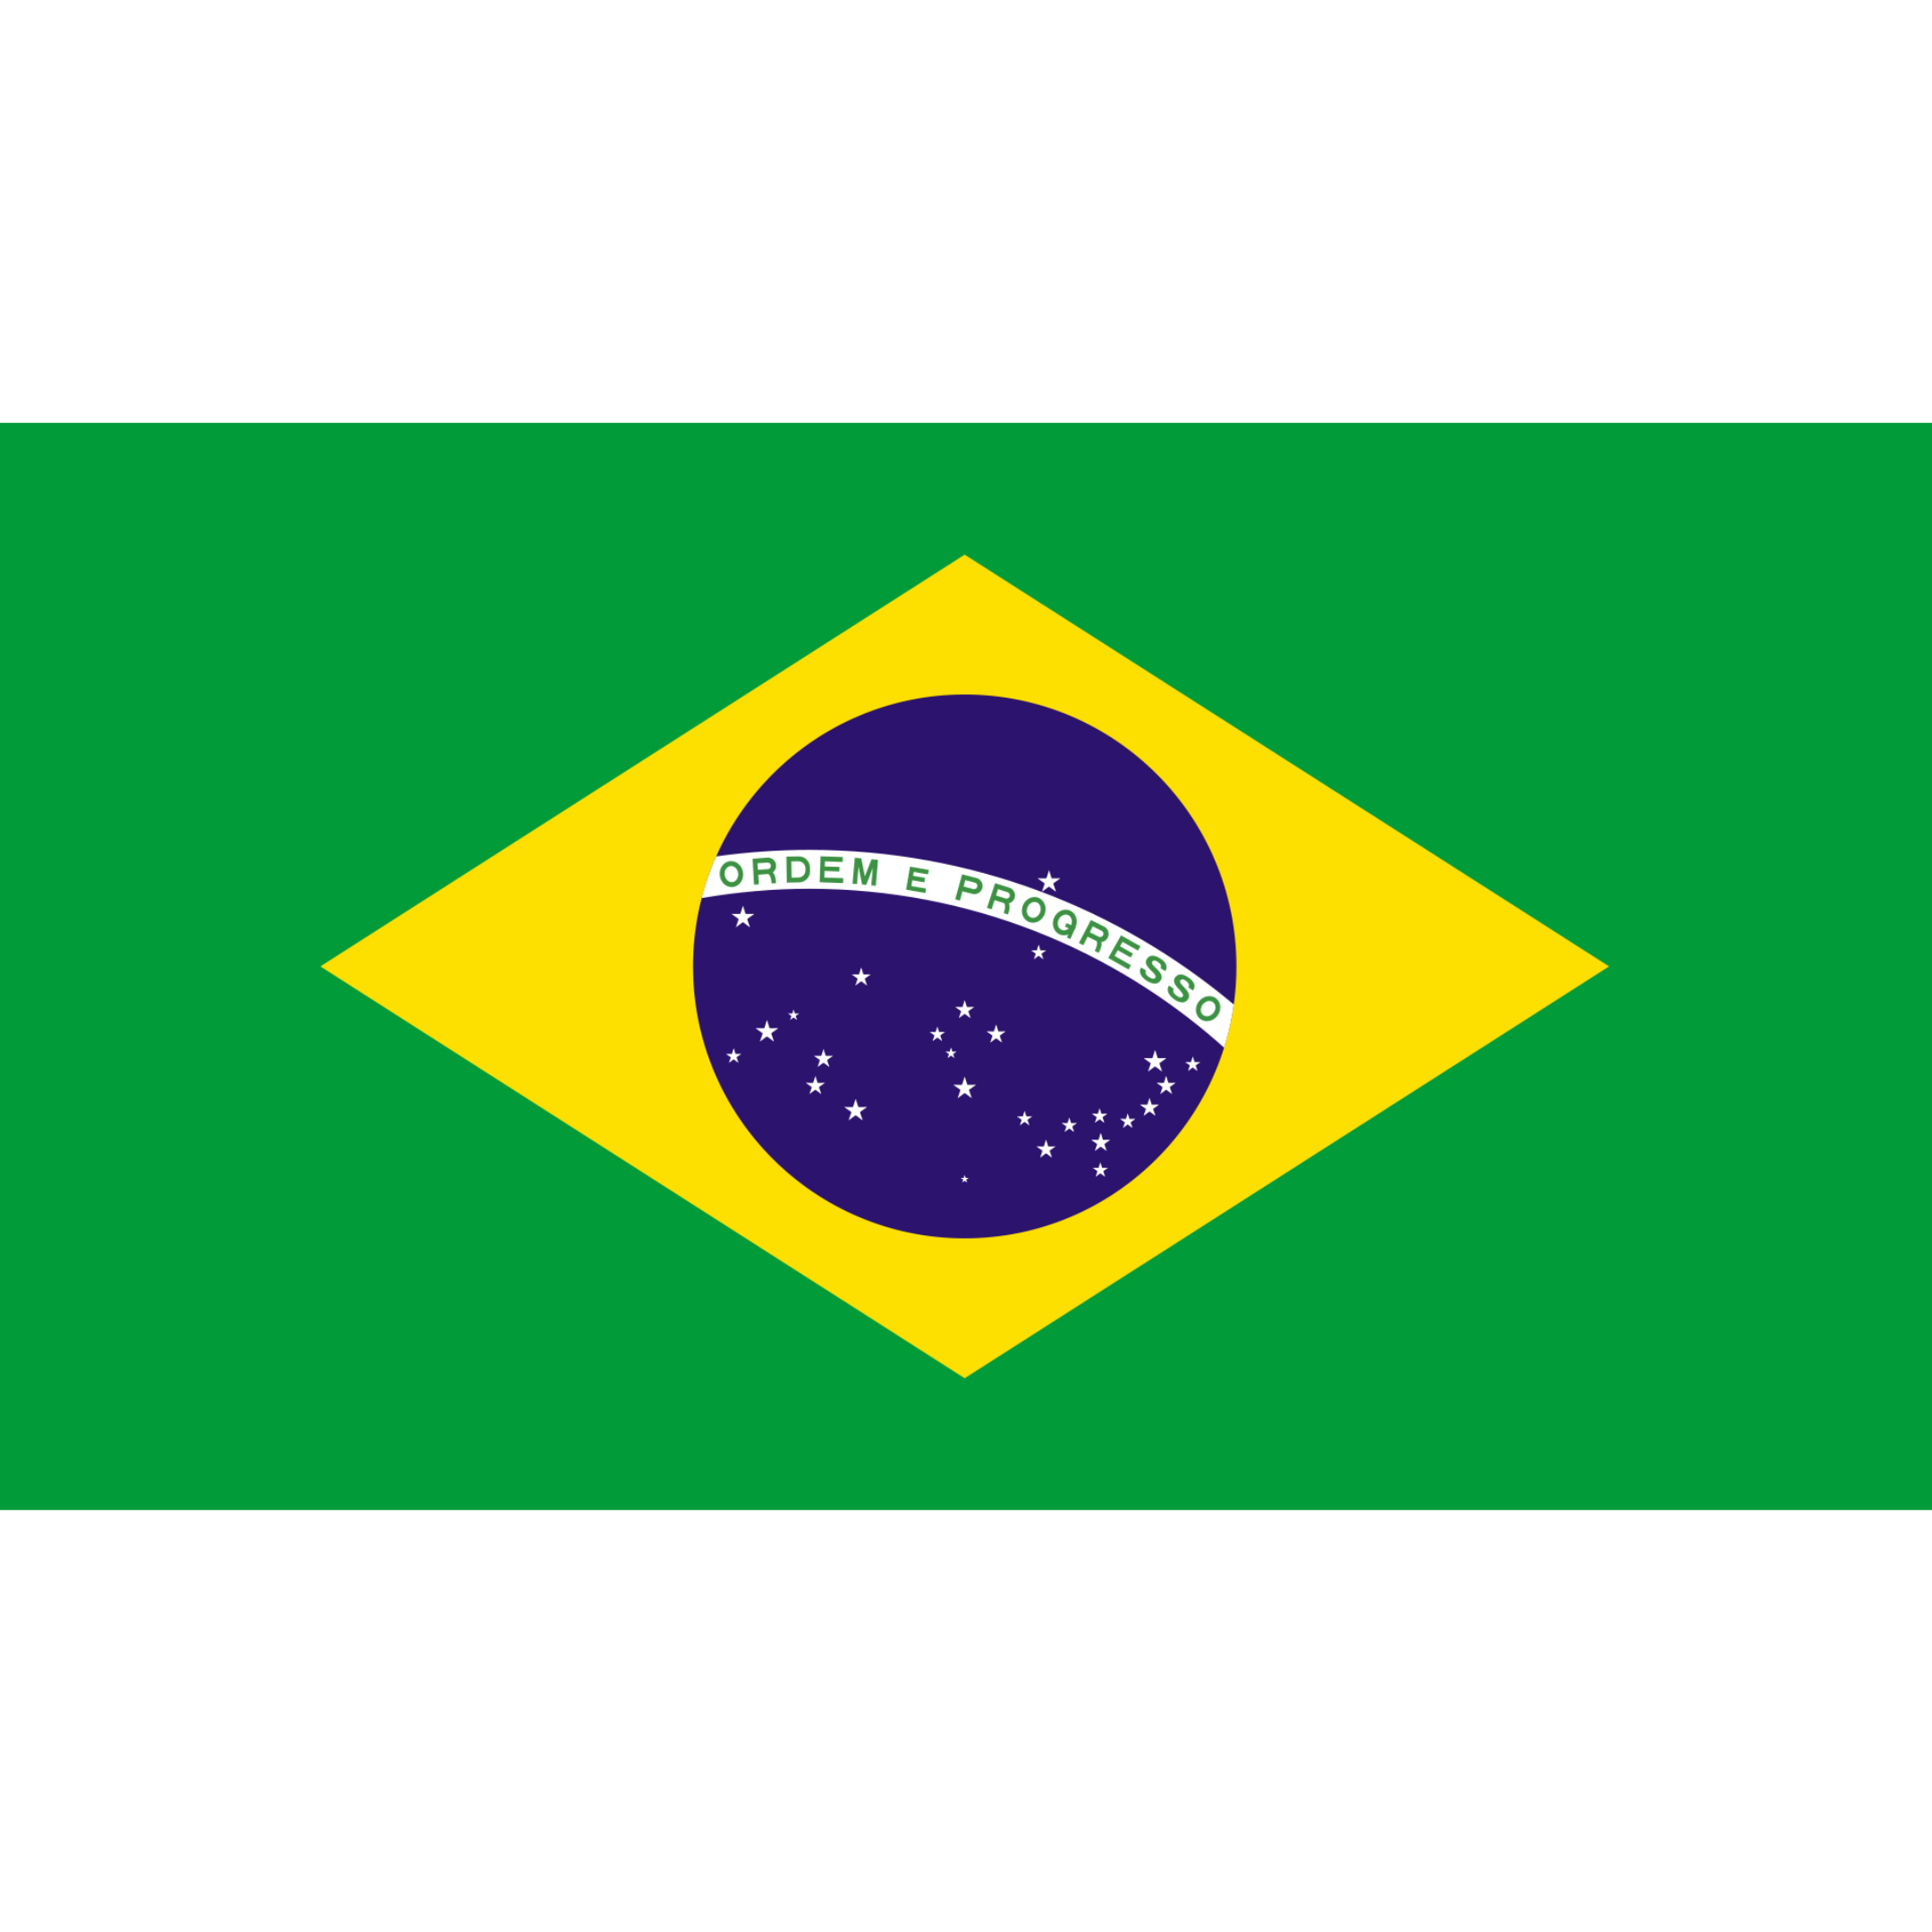 Brazil's flag has a green background with a central yellow rhombus, blue globe, white stars and band with the national motto.